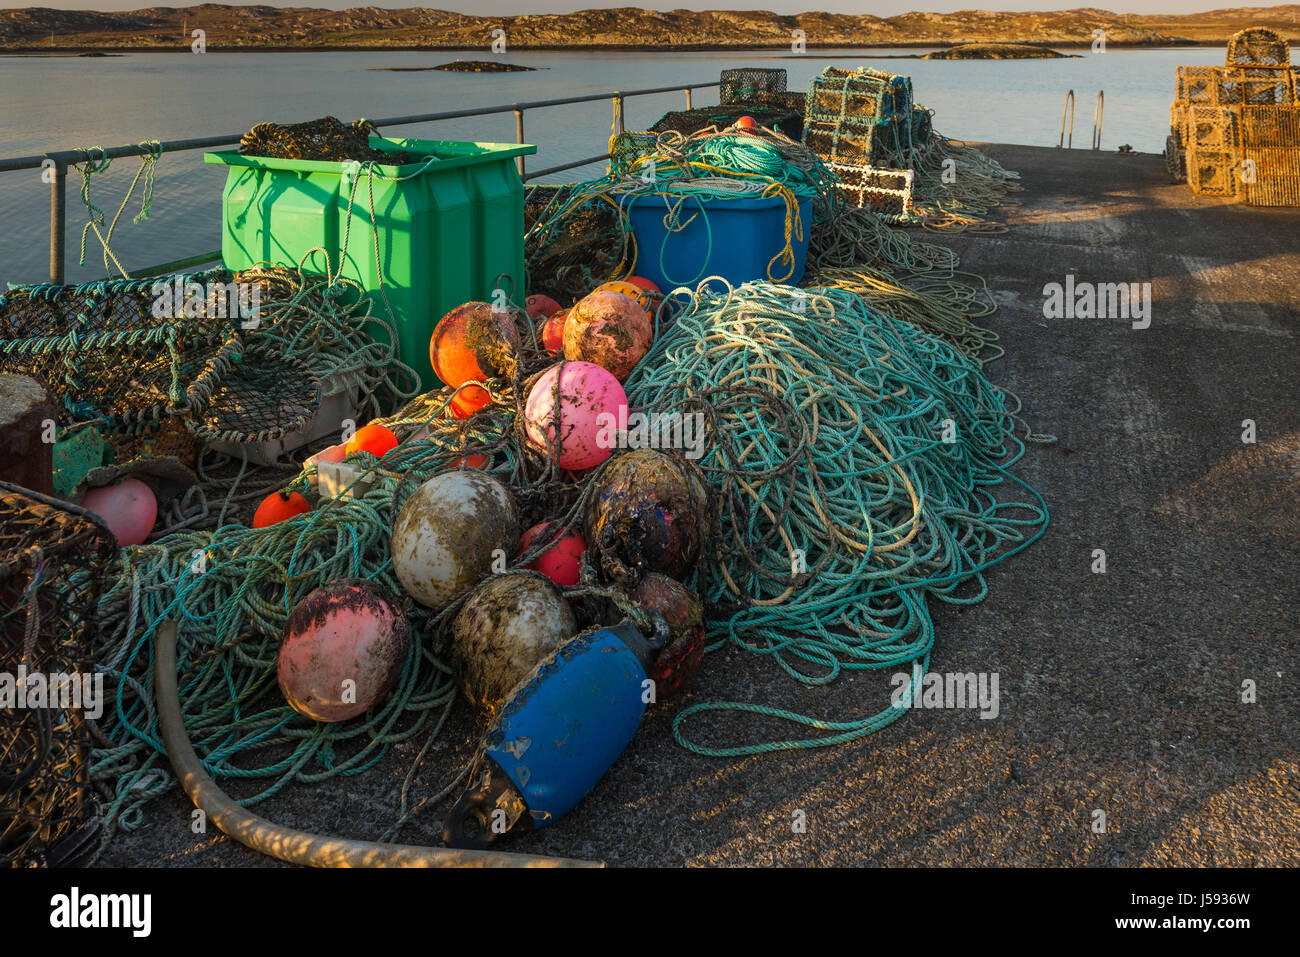 The parafhernalia of the fishing industry on Arinagour Pier The Isle of Coll Scotland Stock Photo